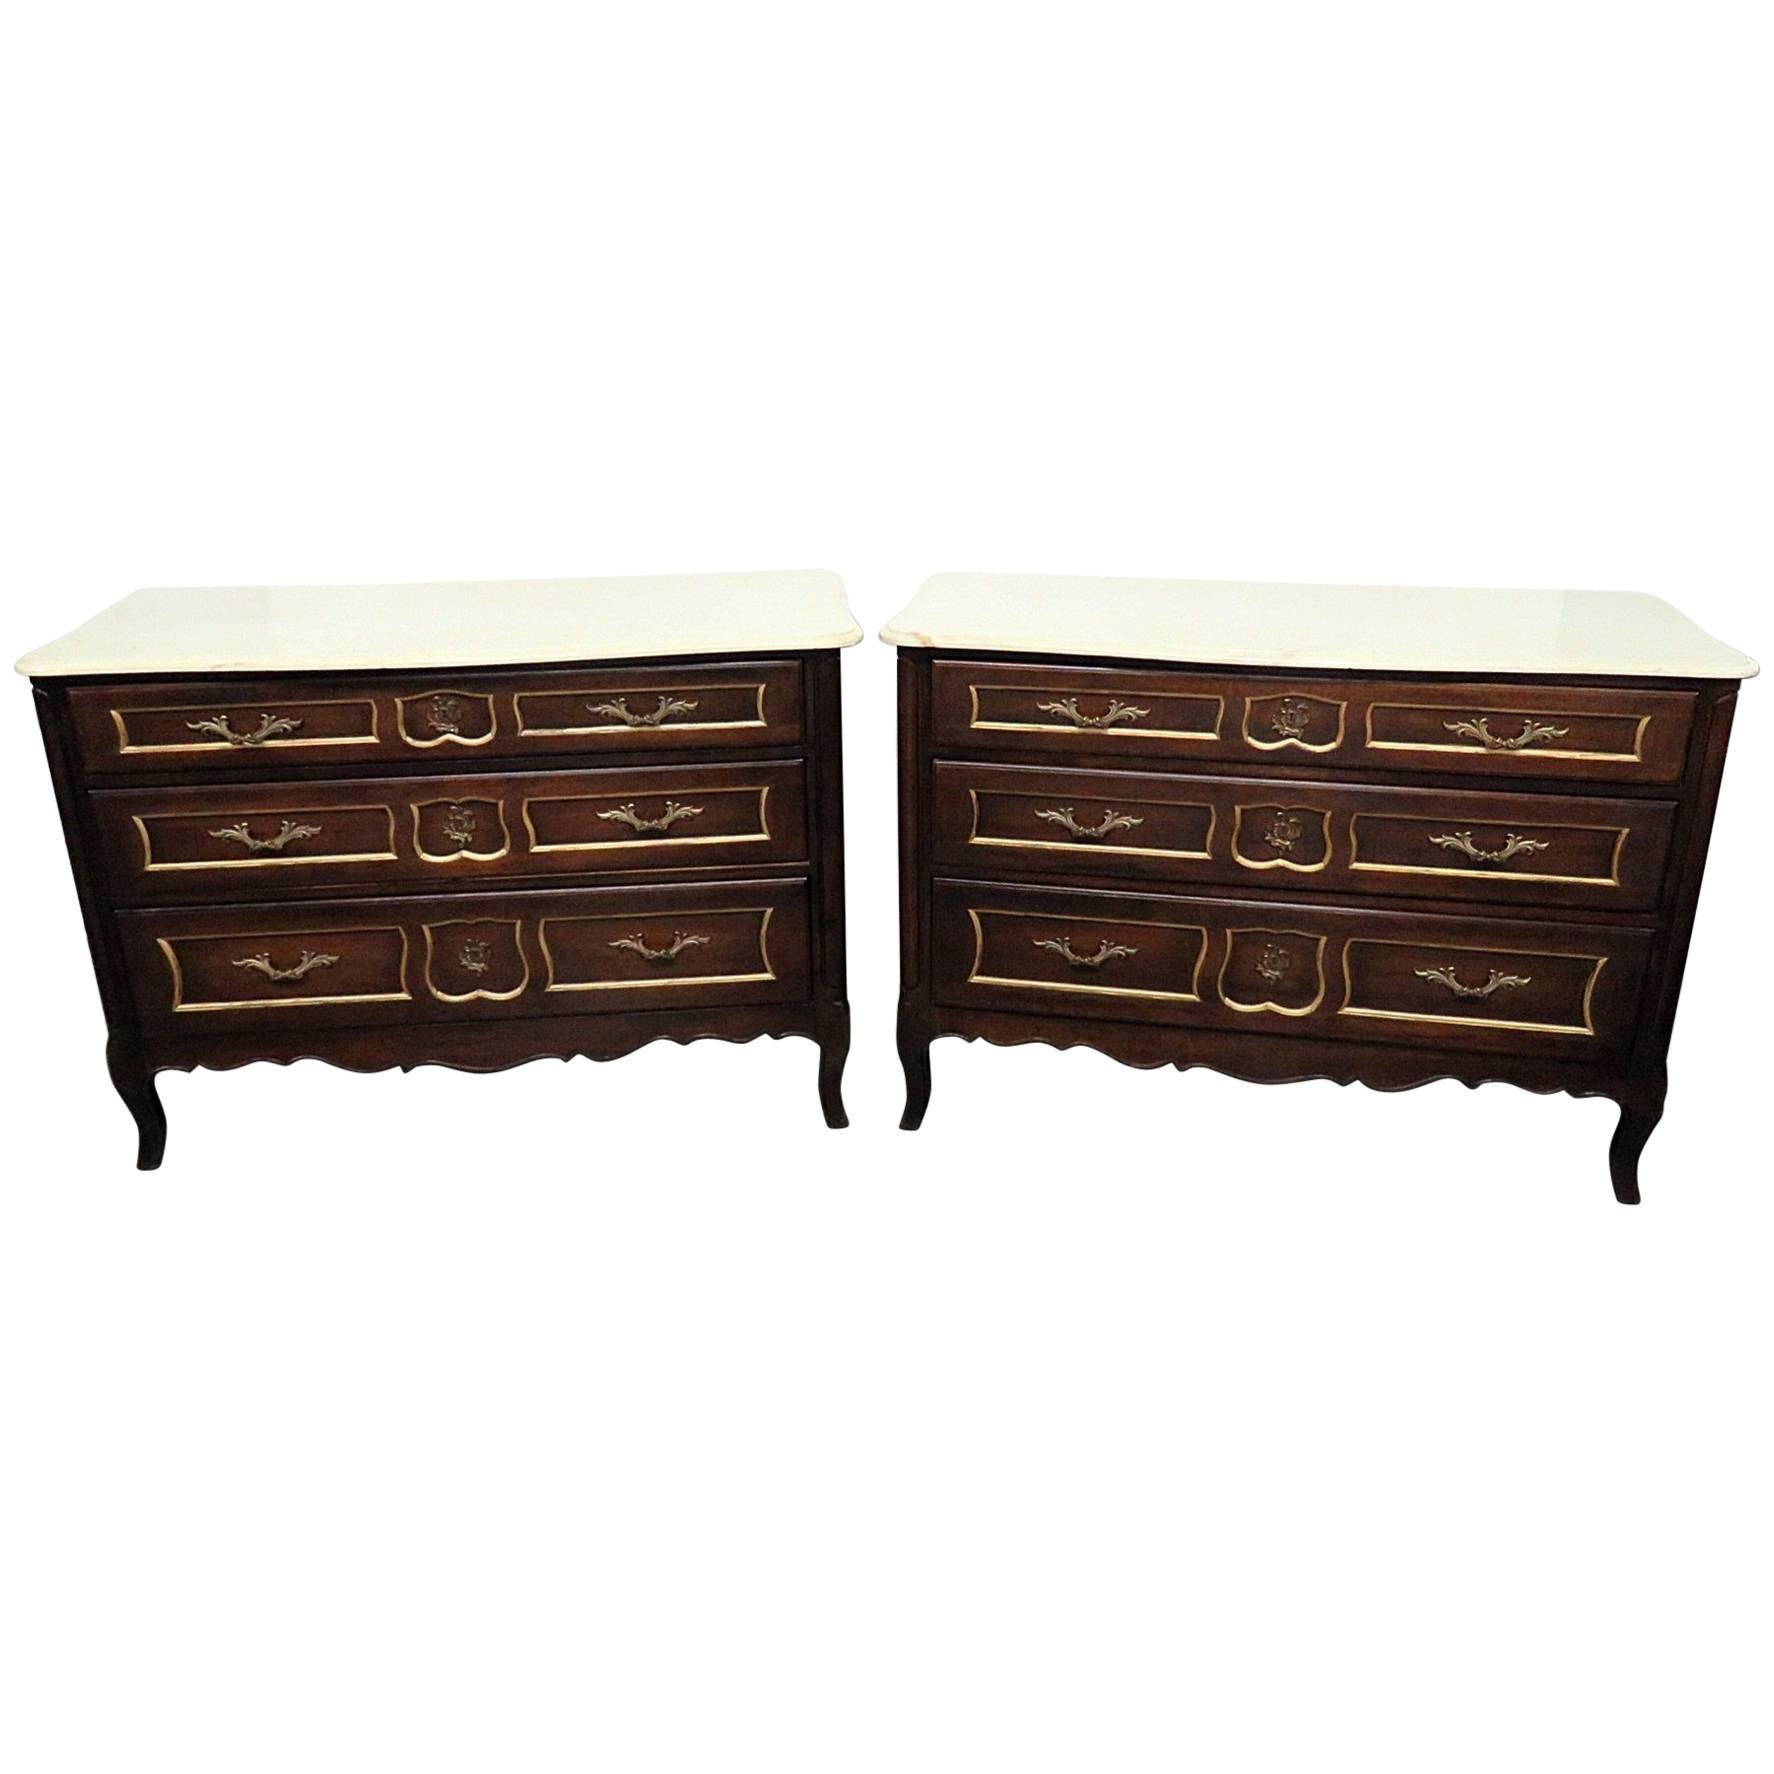 Pair of Drexel Marble-Top Commodes